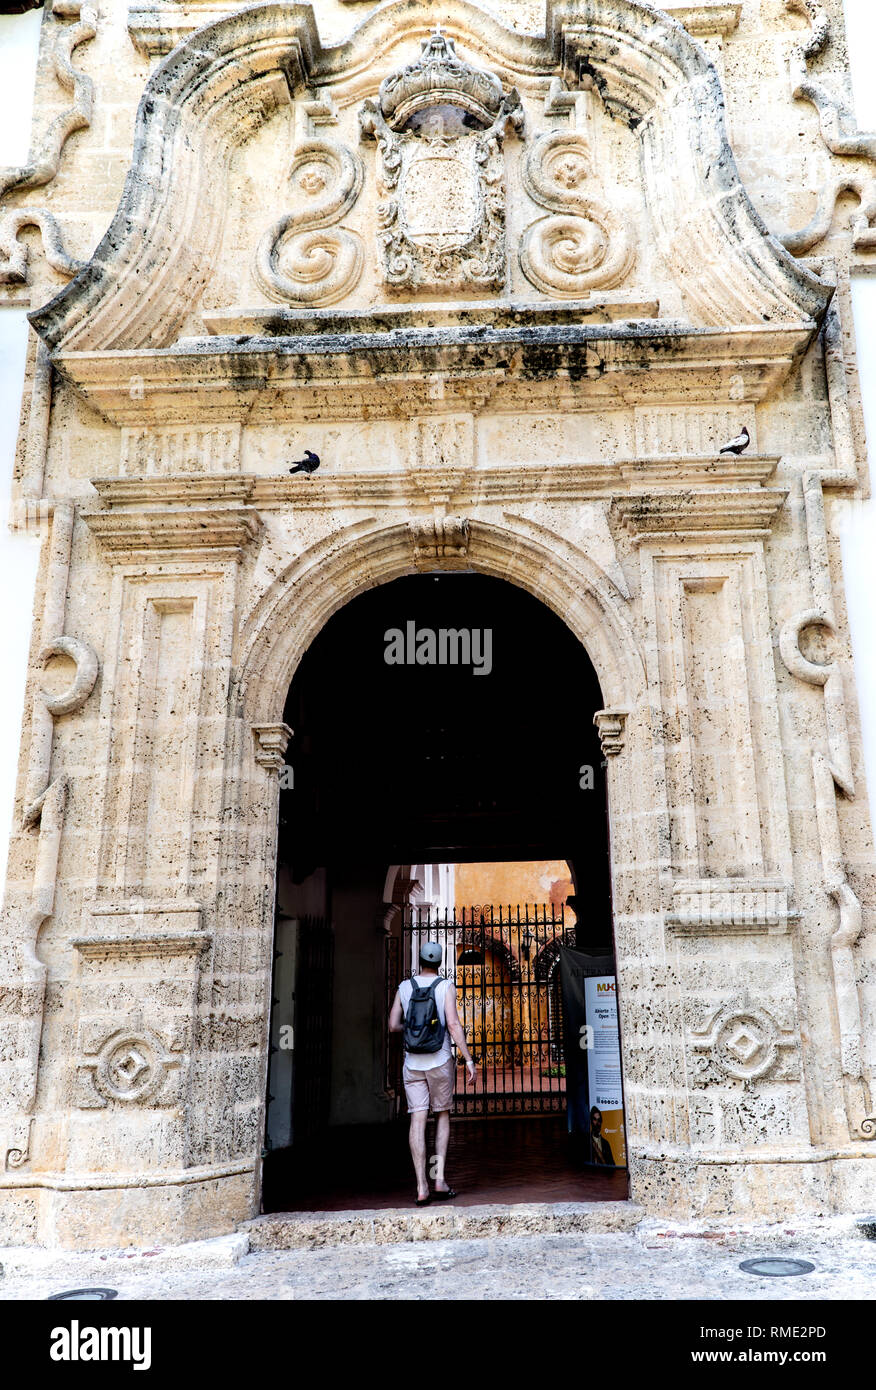 The Palace Of The Inquisition Cartagena Colombia South America Stock Photo